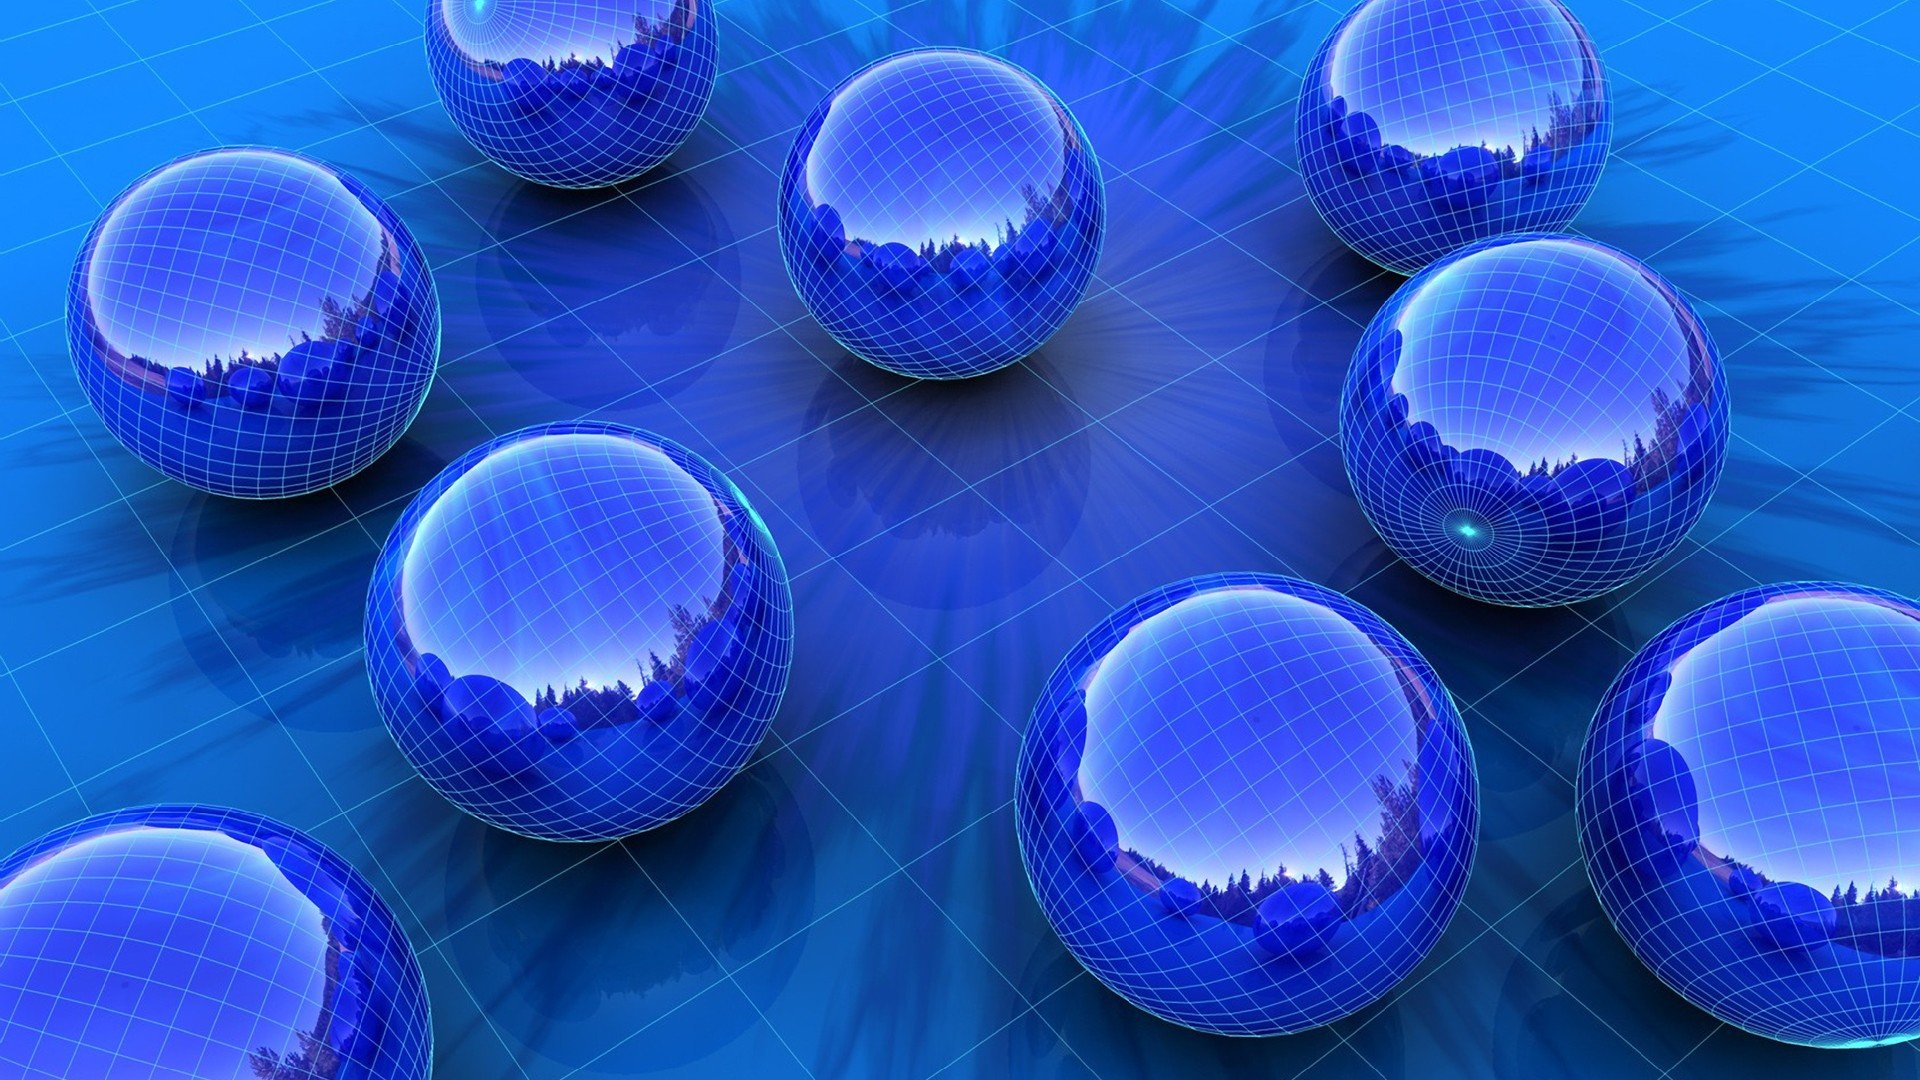 3d, View, Abstract, Cgi, Balls, Grid, Burst, Spheres, 3d, Renders, 3d, Modeling, Reflections Wallpaper